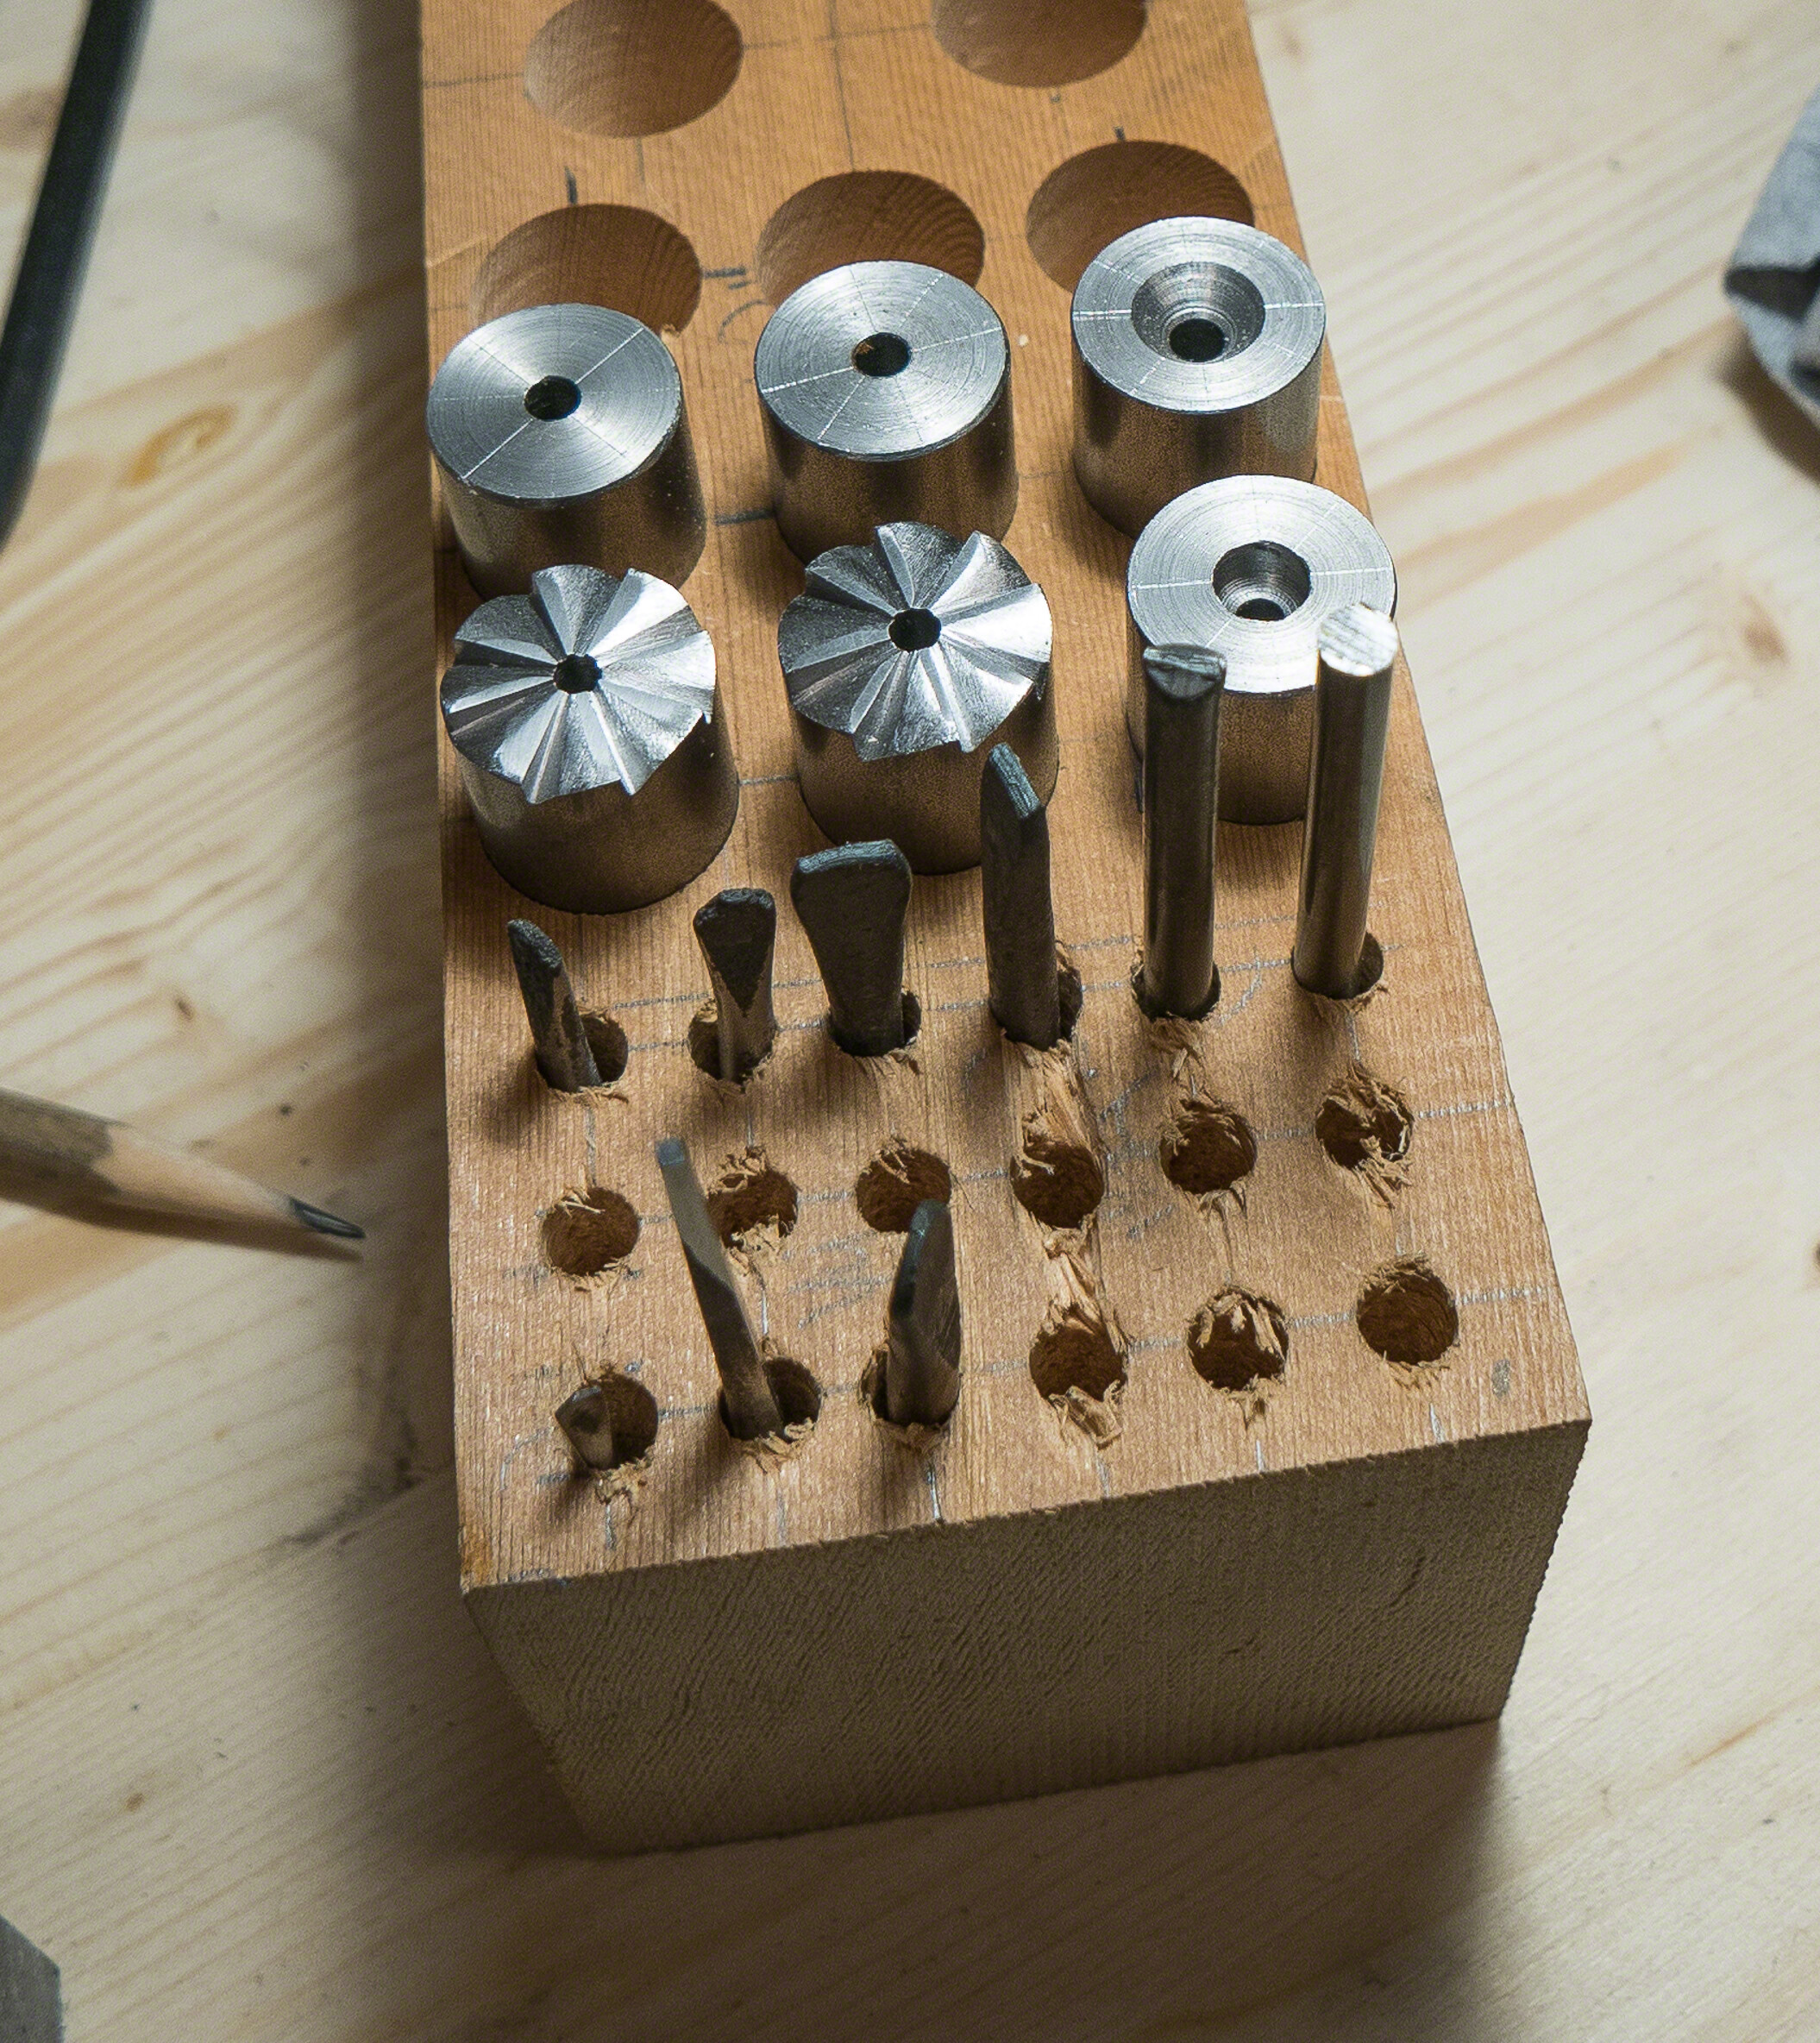 Screw mills, drill bits, reamers, and taps in progress for handmade lock project.